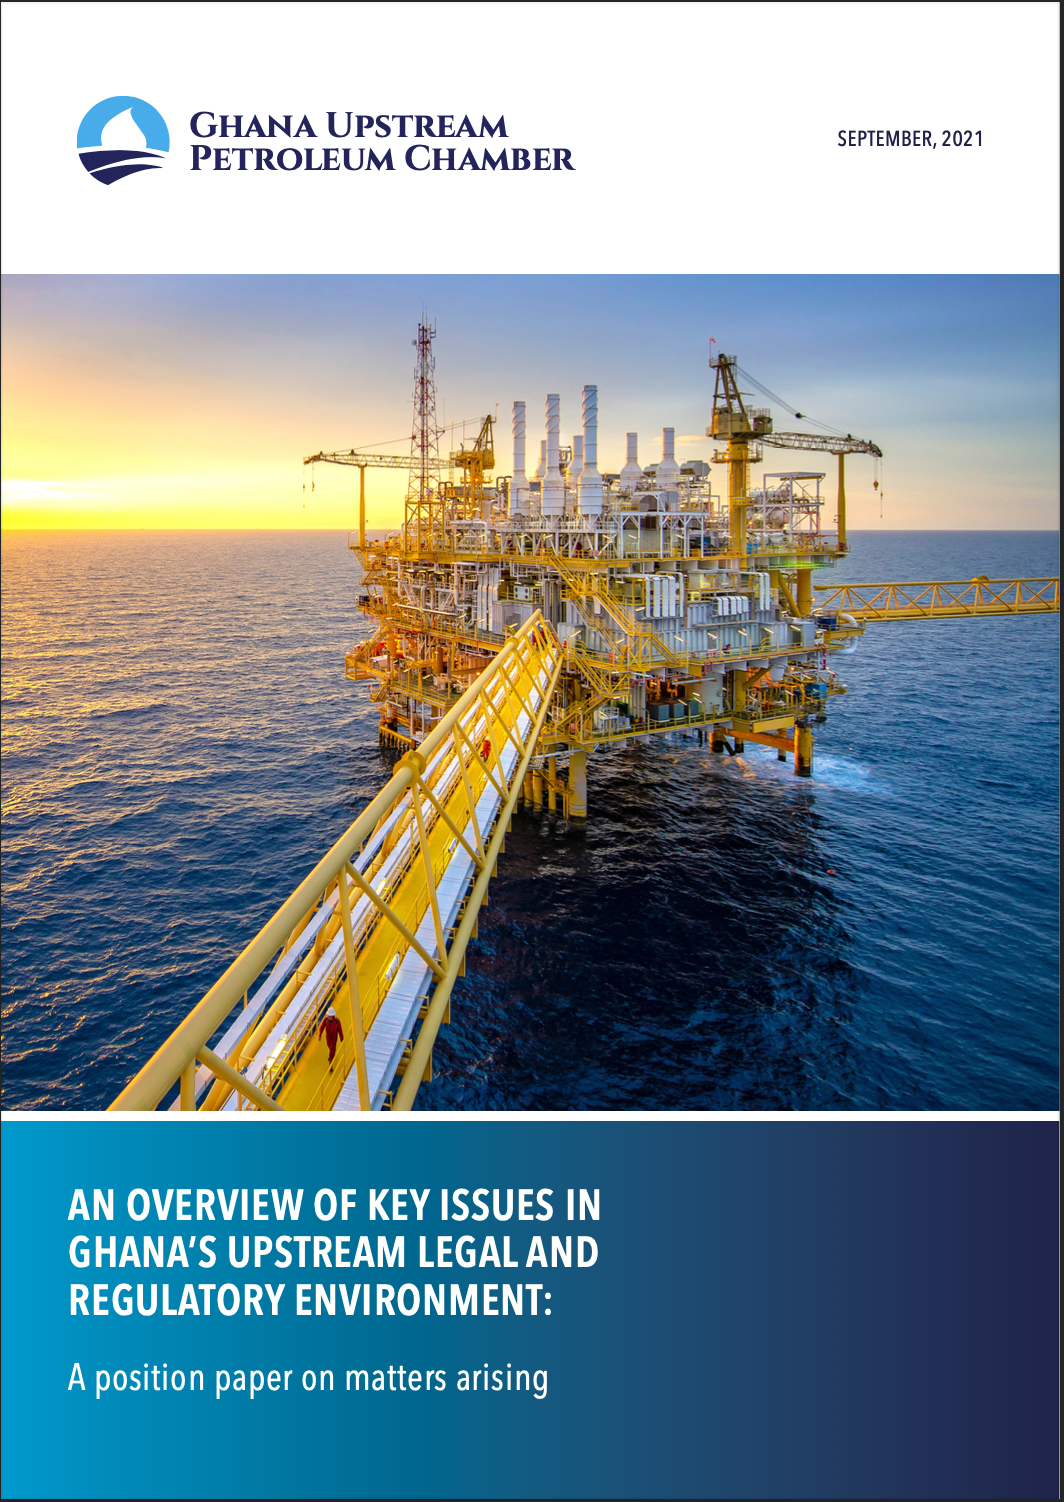 An Overview Of Key Issues In Ghana’s Upstream Legal And Regulatory Environment: A position paper on matters arising